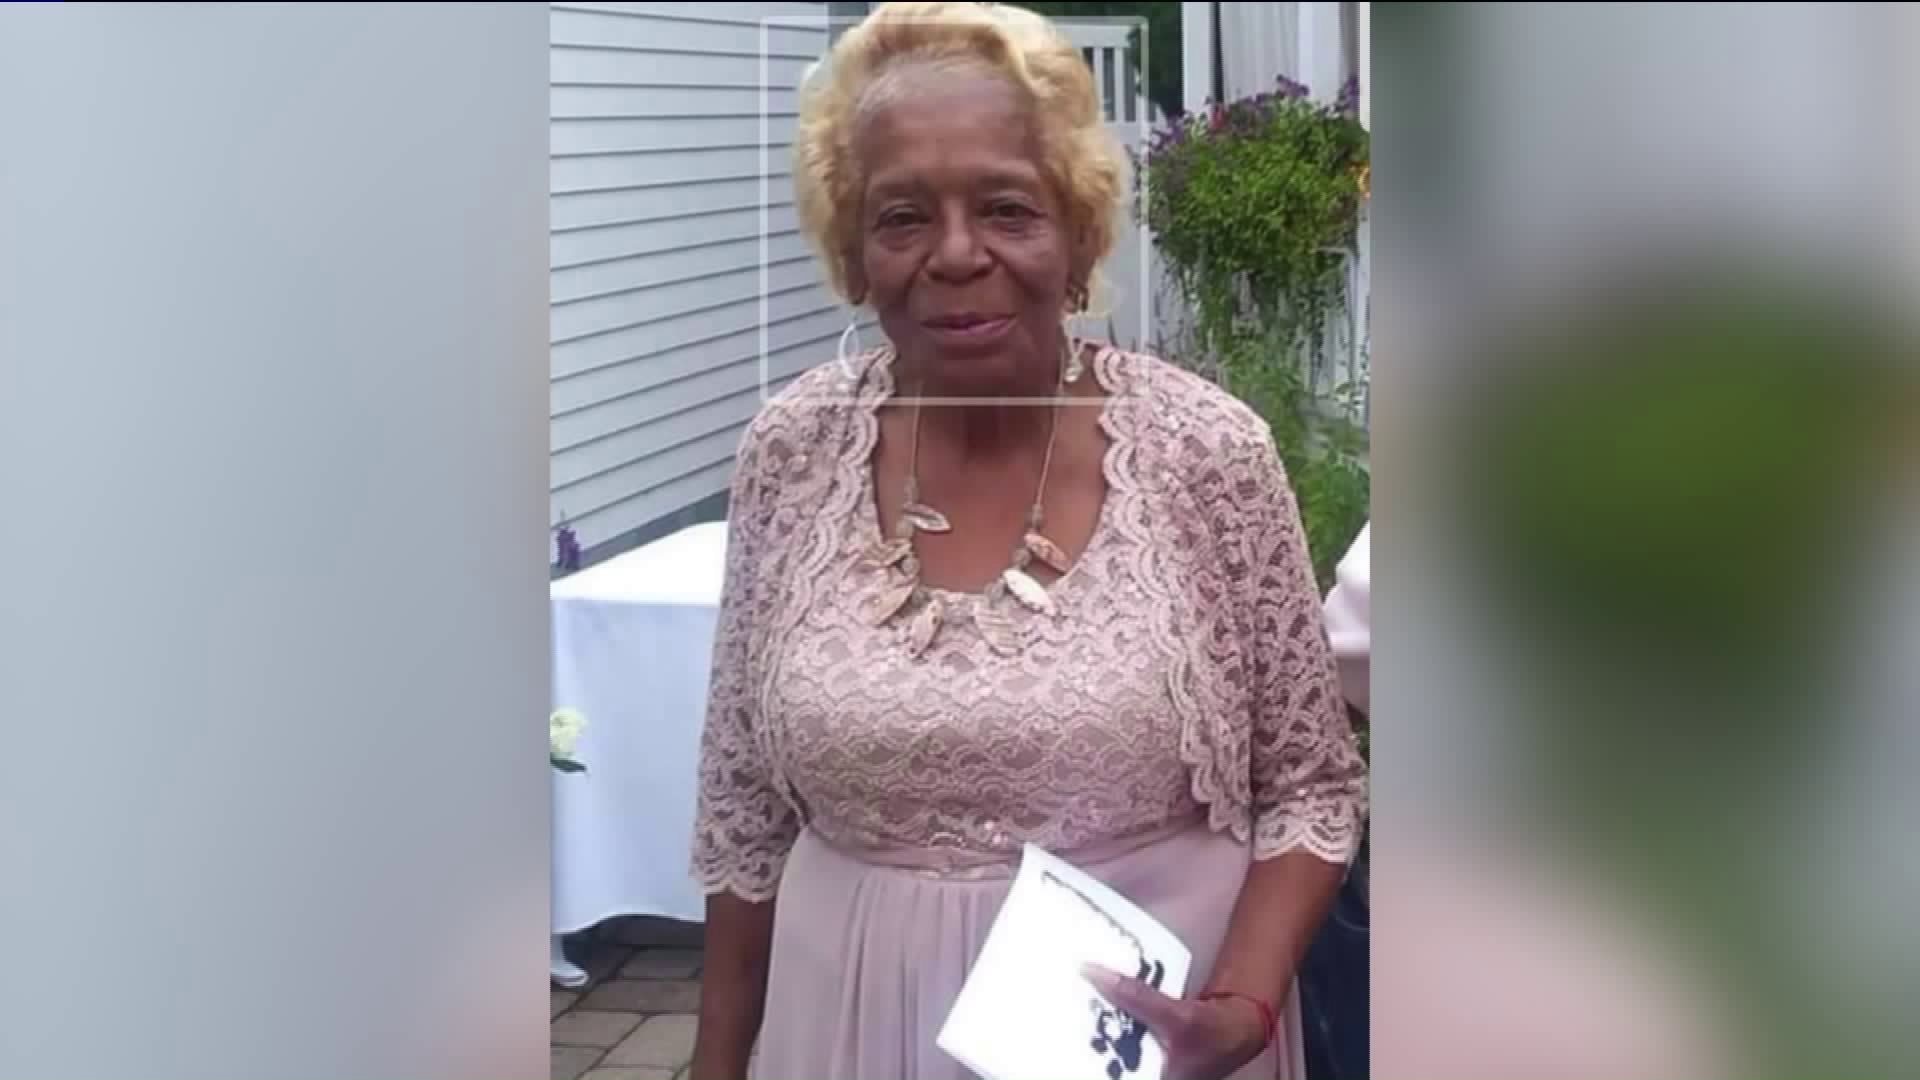 71-year-old woman hit and killed by fleeing vehicle